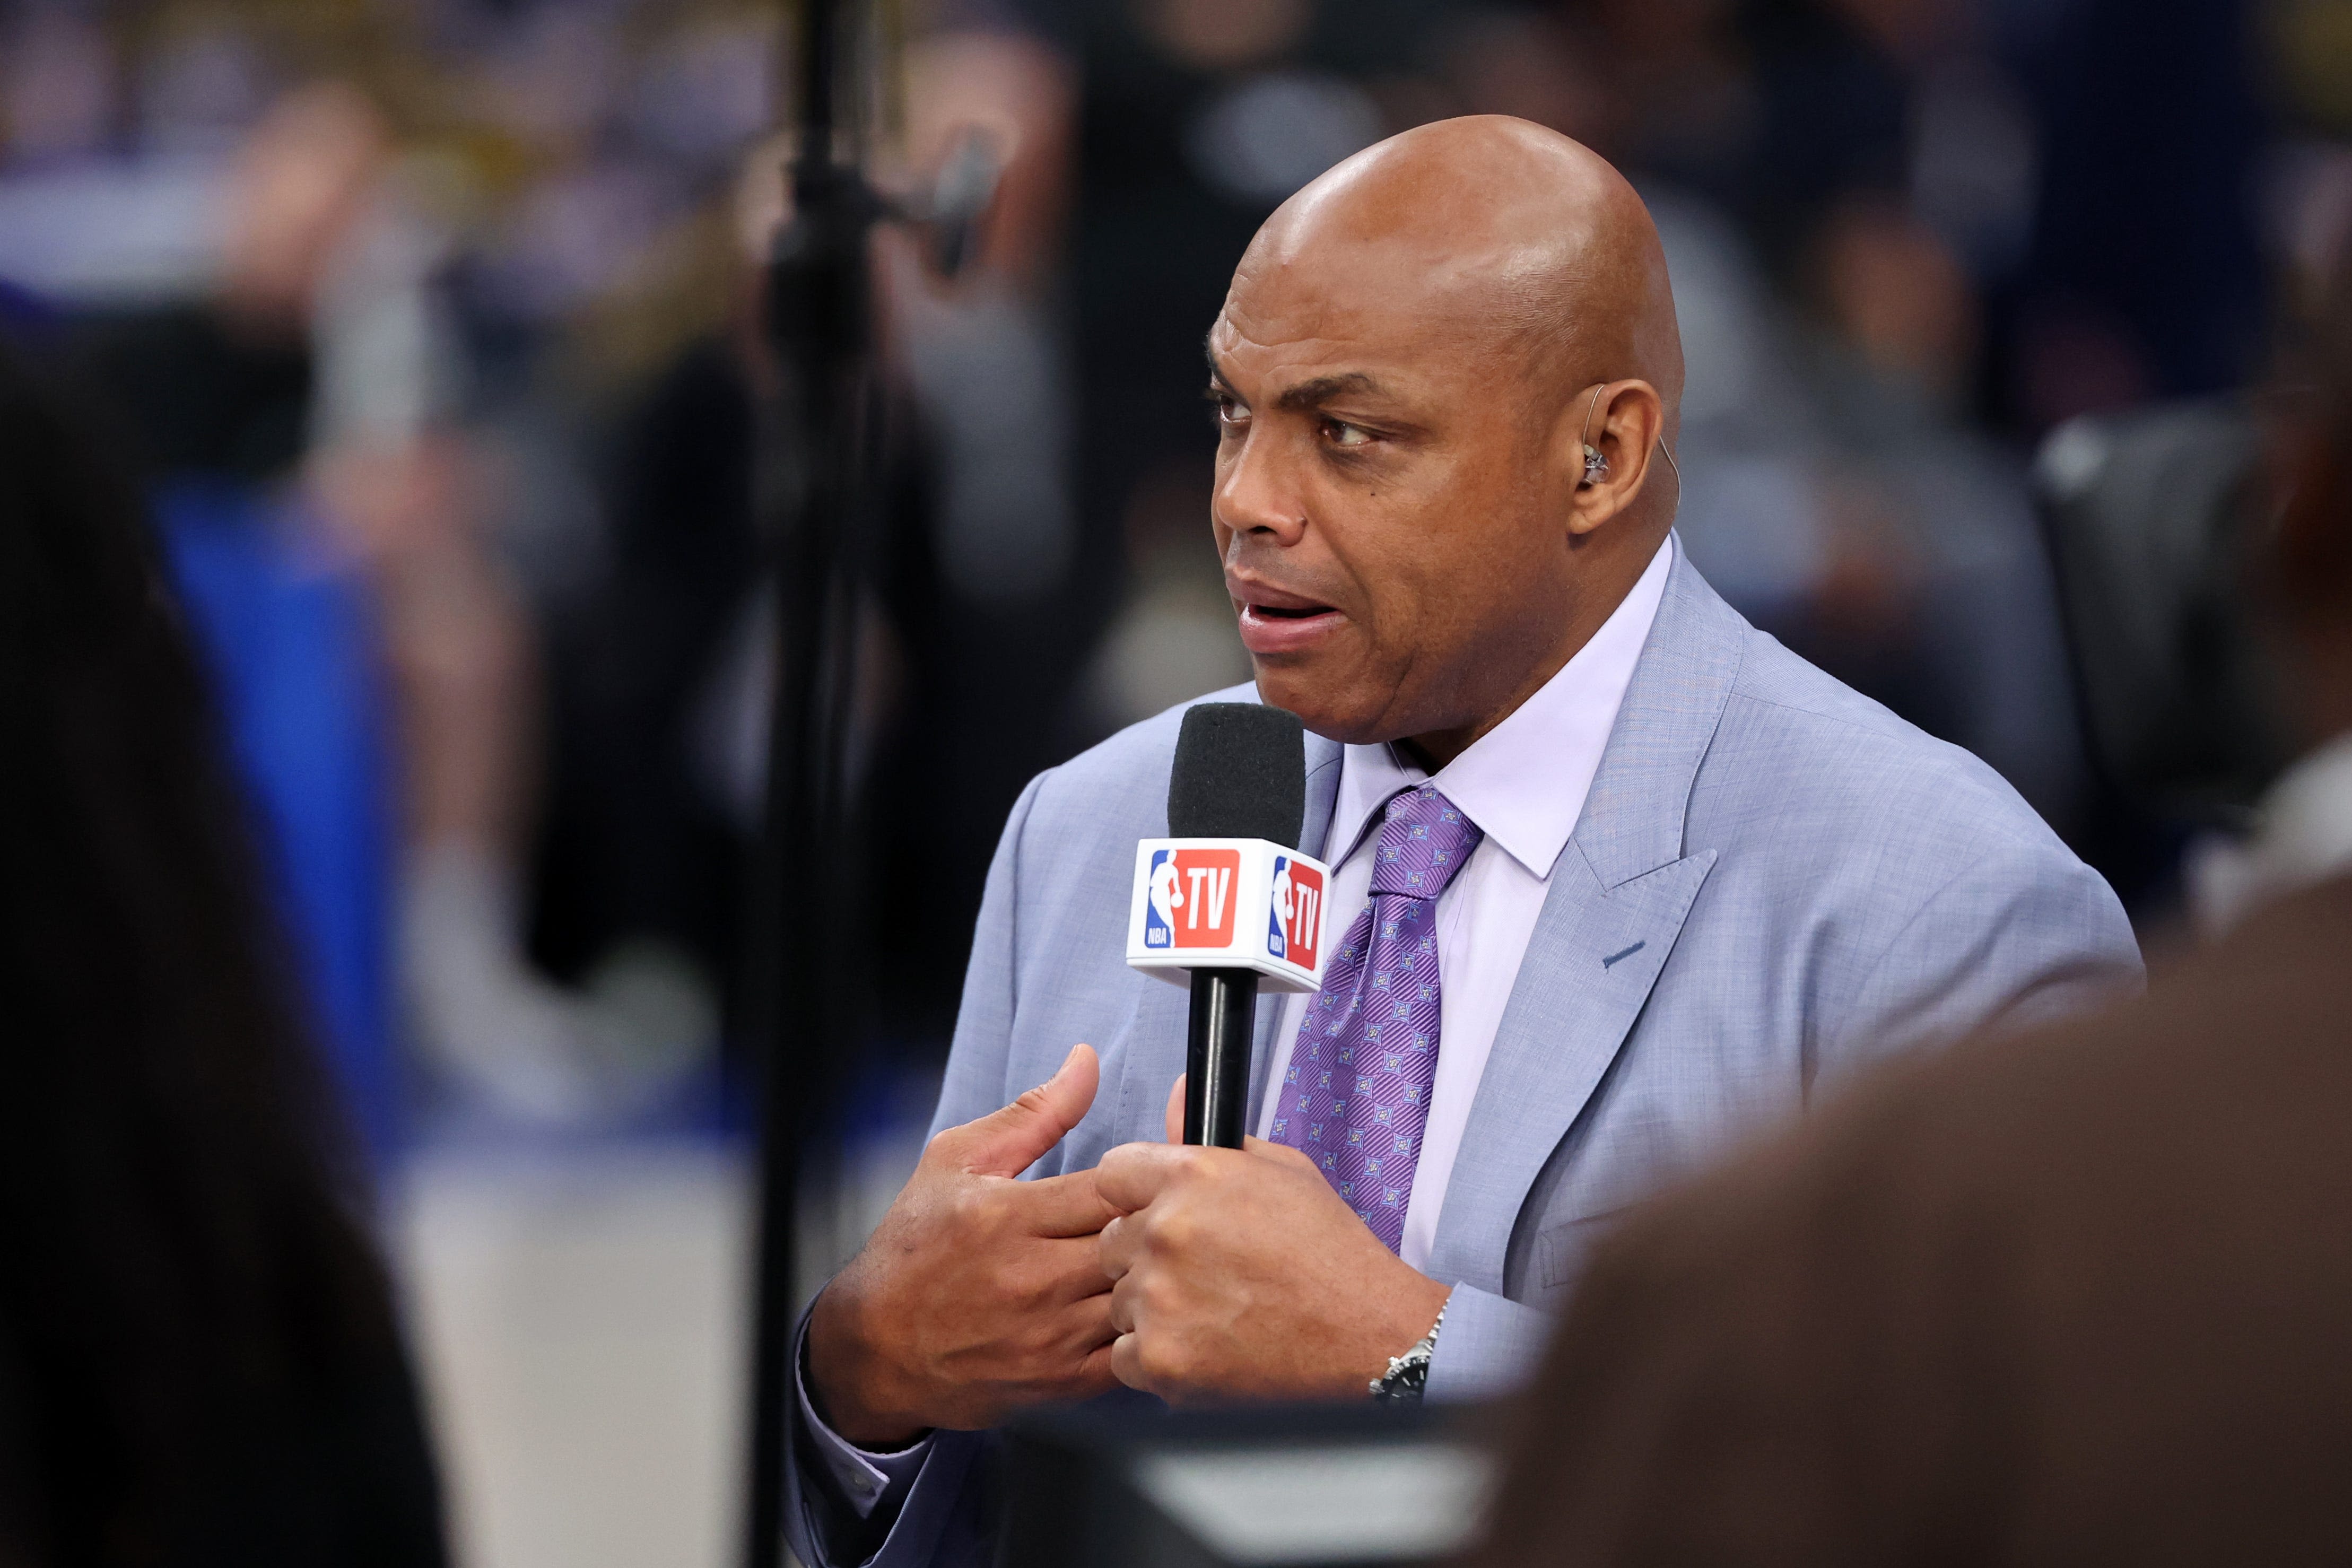 Charles Barkley will stay at TNT even as NBA is set to leave network: 'This is the only place for me'